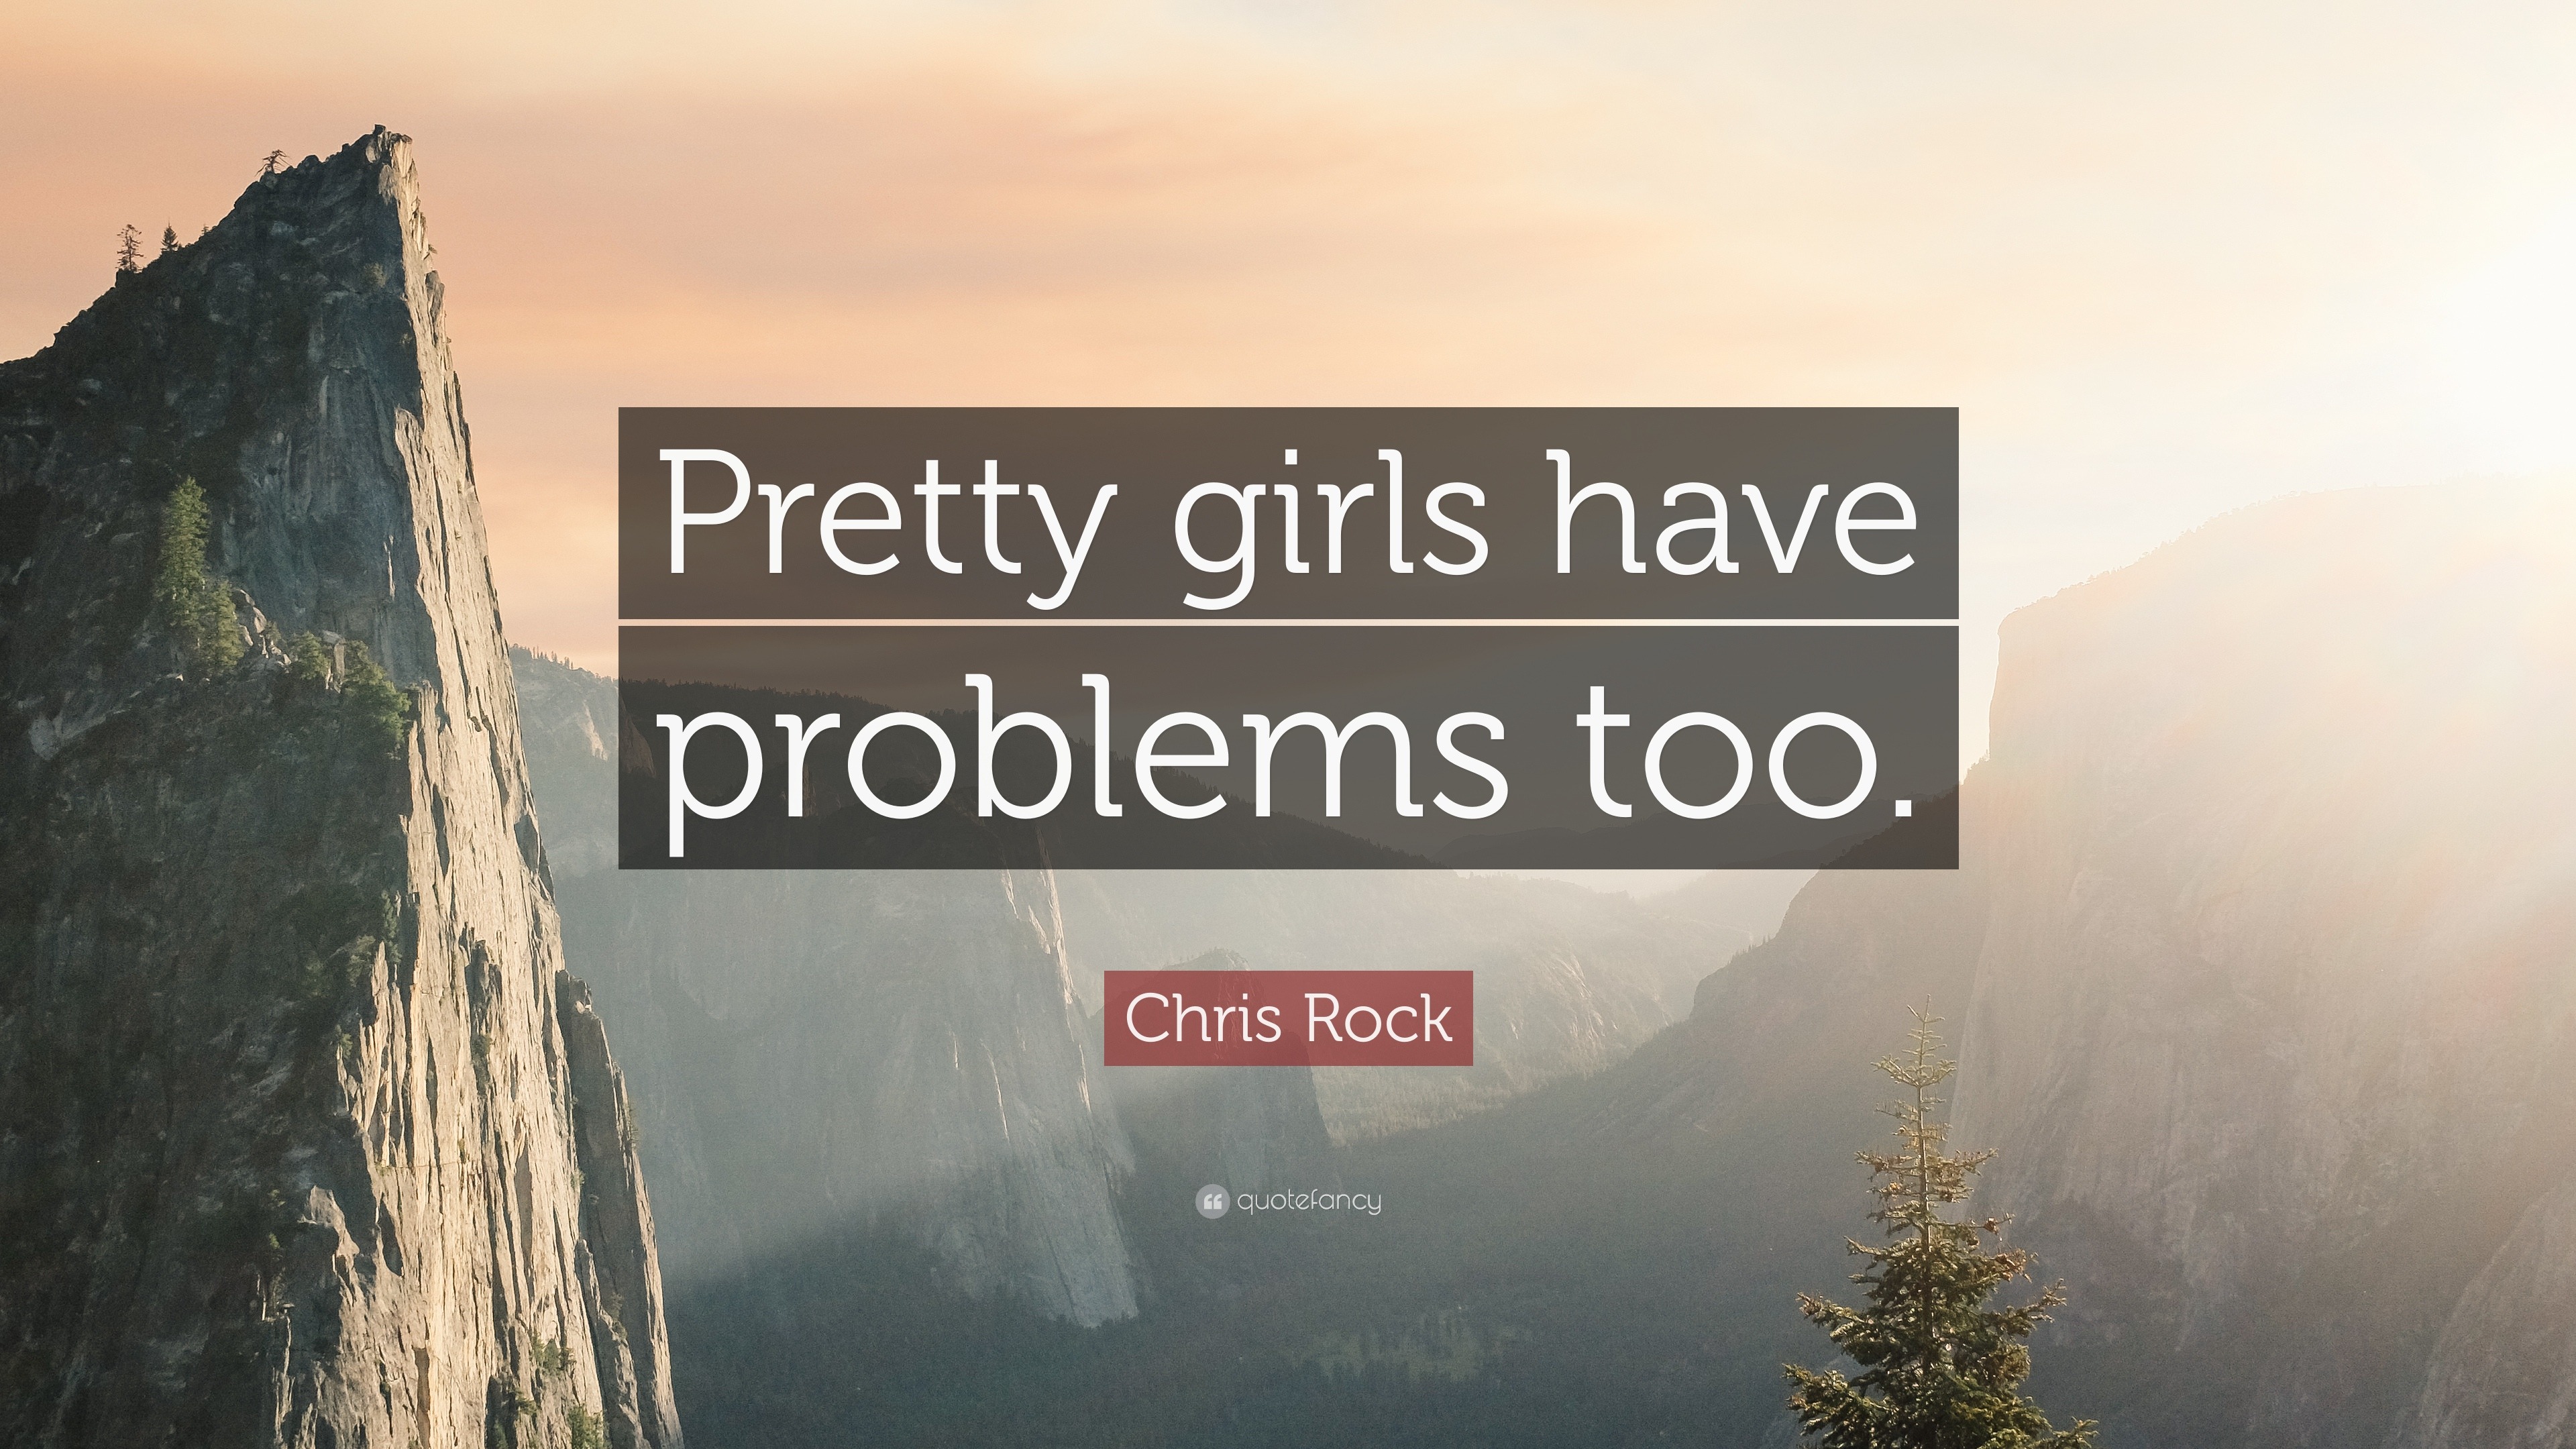 Chris Rock Quote: “Pretty girls have problems too.”